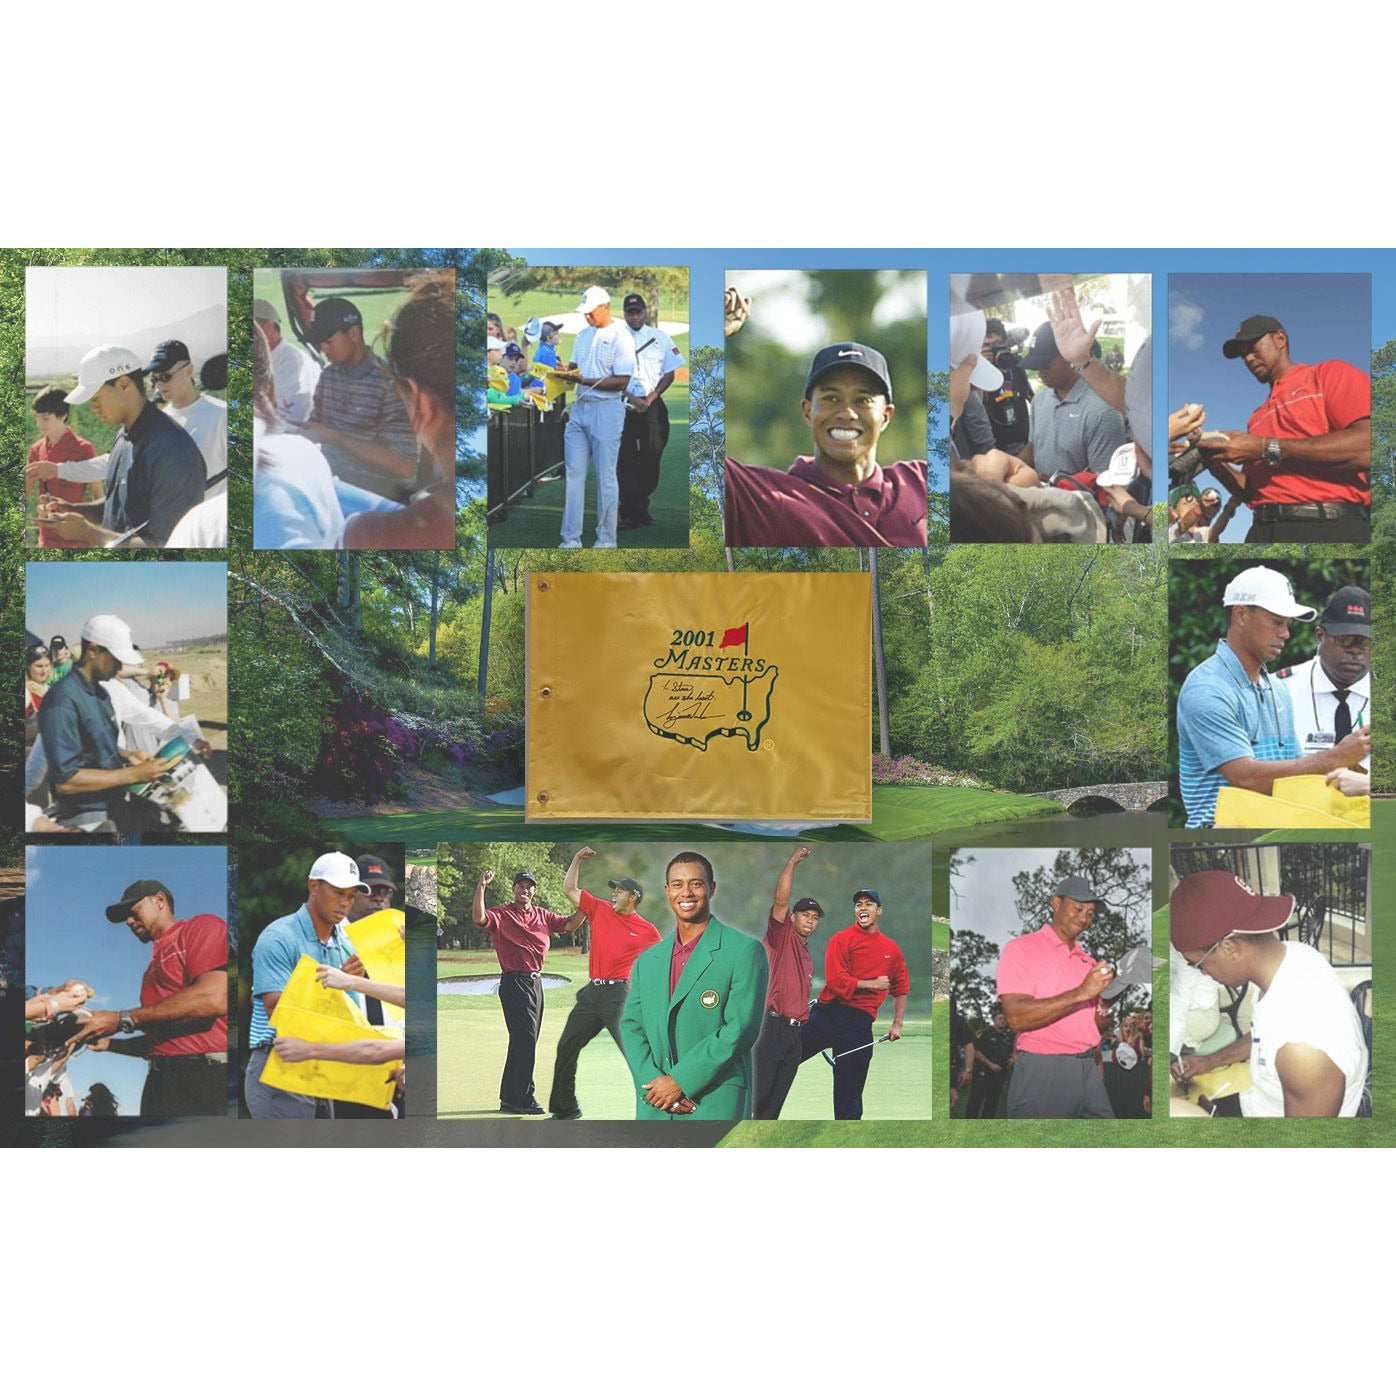 Tiger Woods "To Steve all the best" 2001 Masters Golf pin flag signed with proof